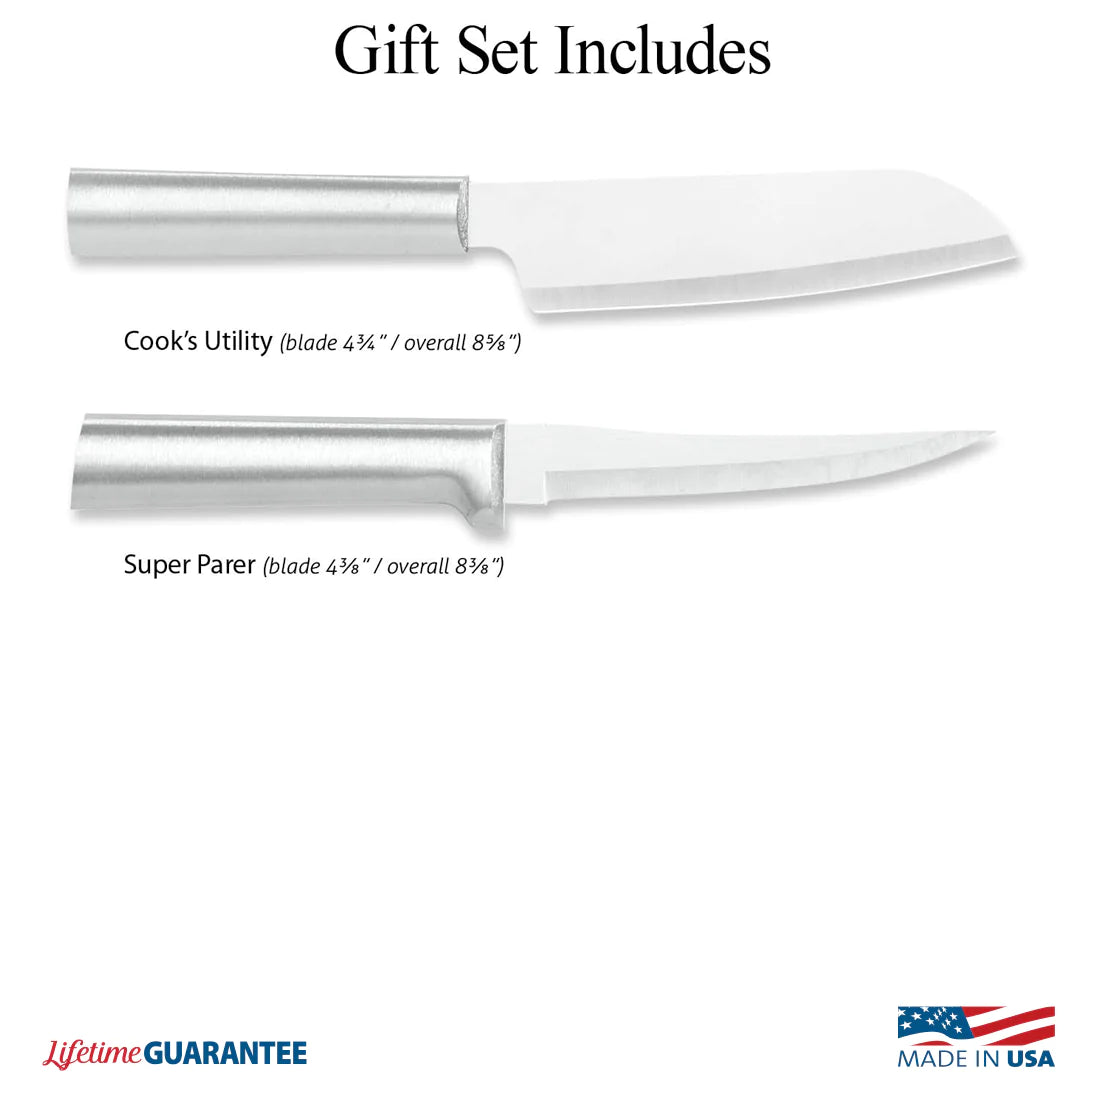 Cook's Choice Knife Gift Set